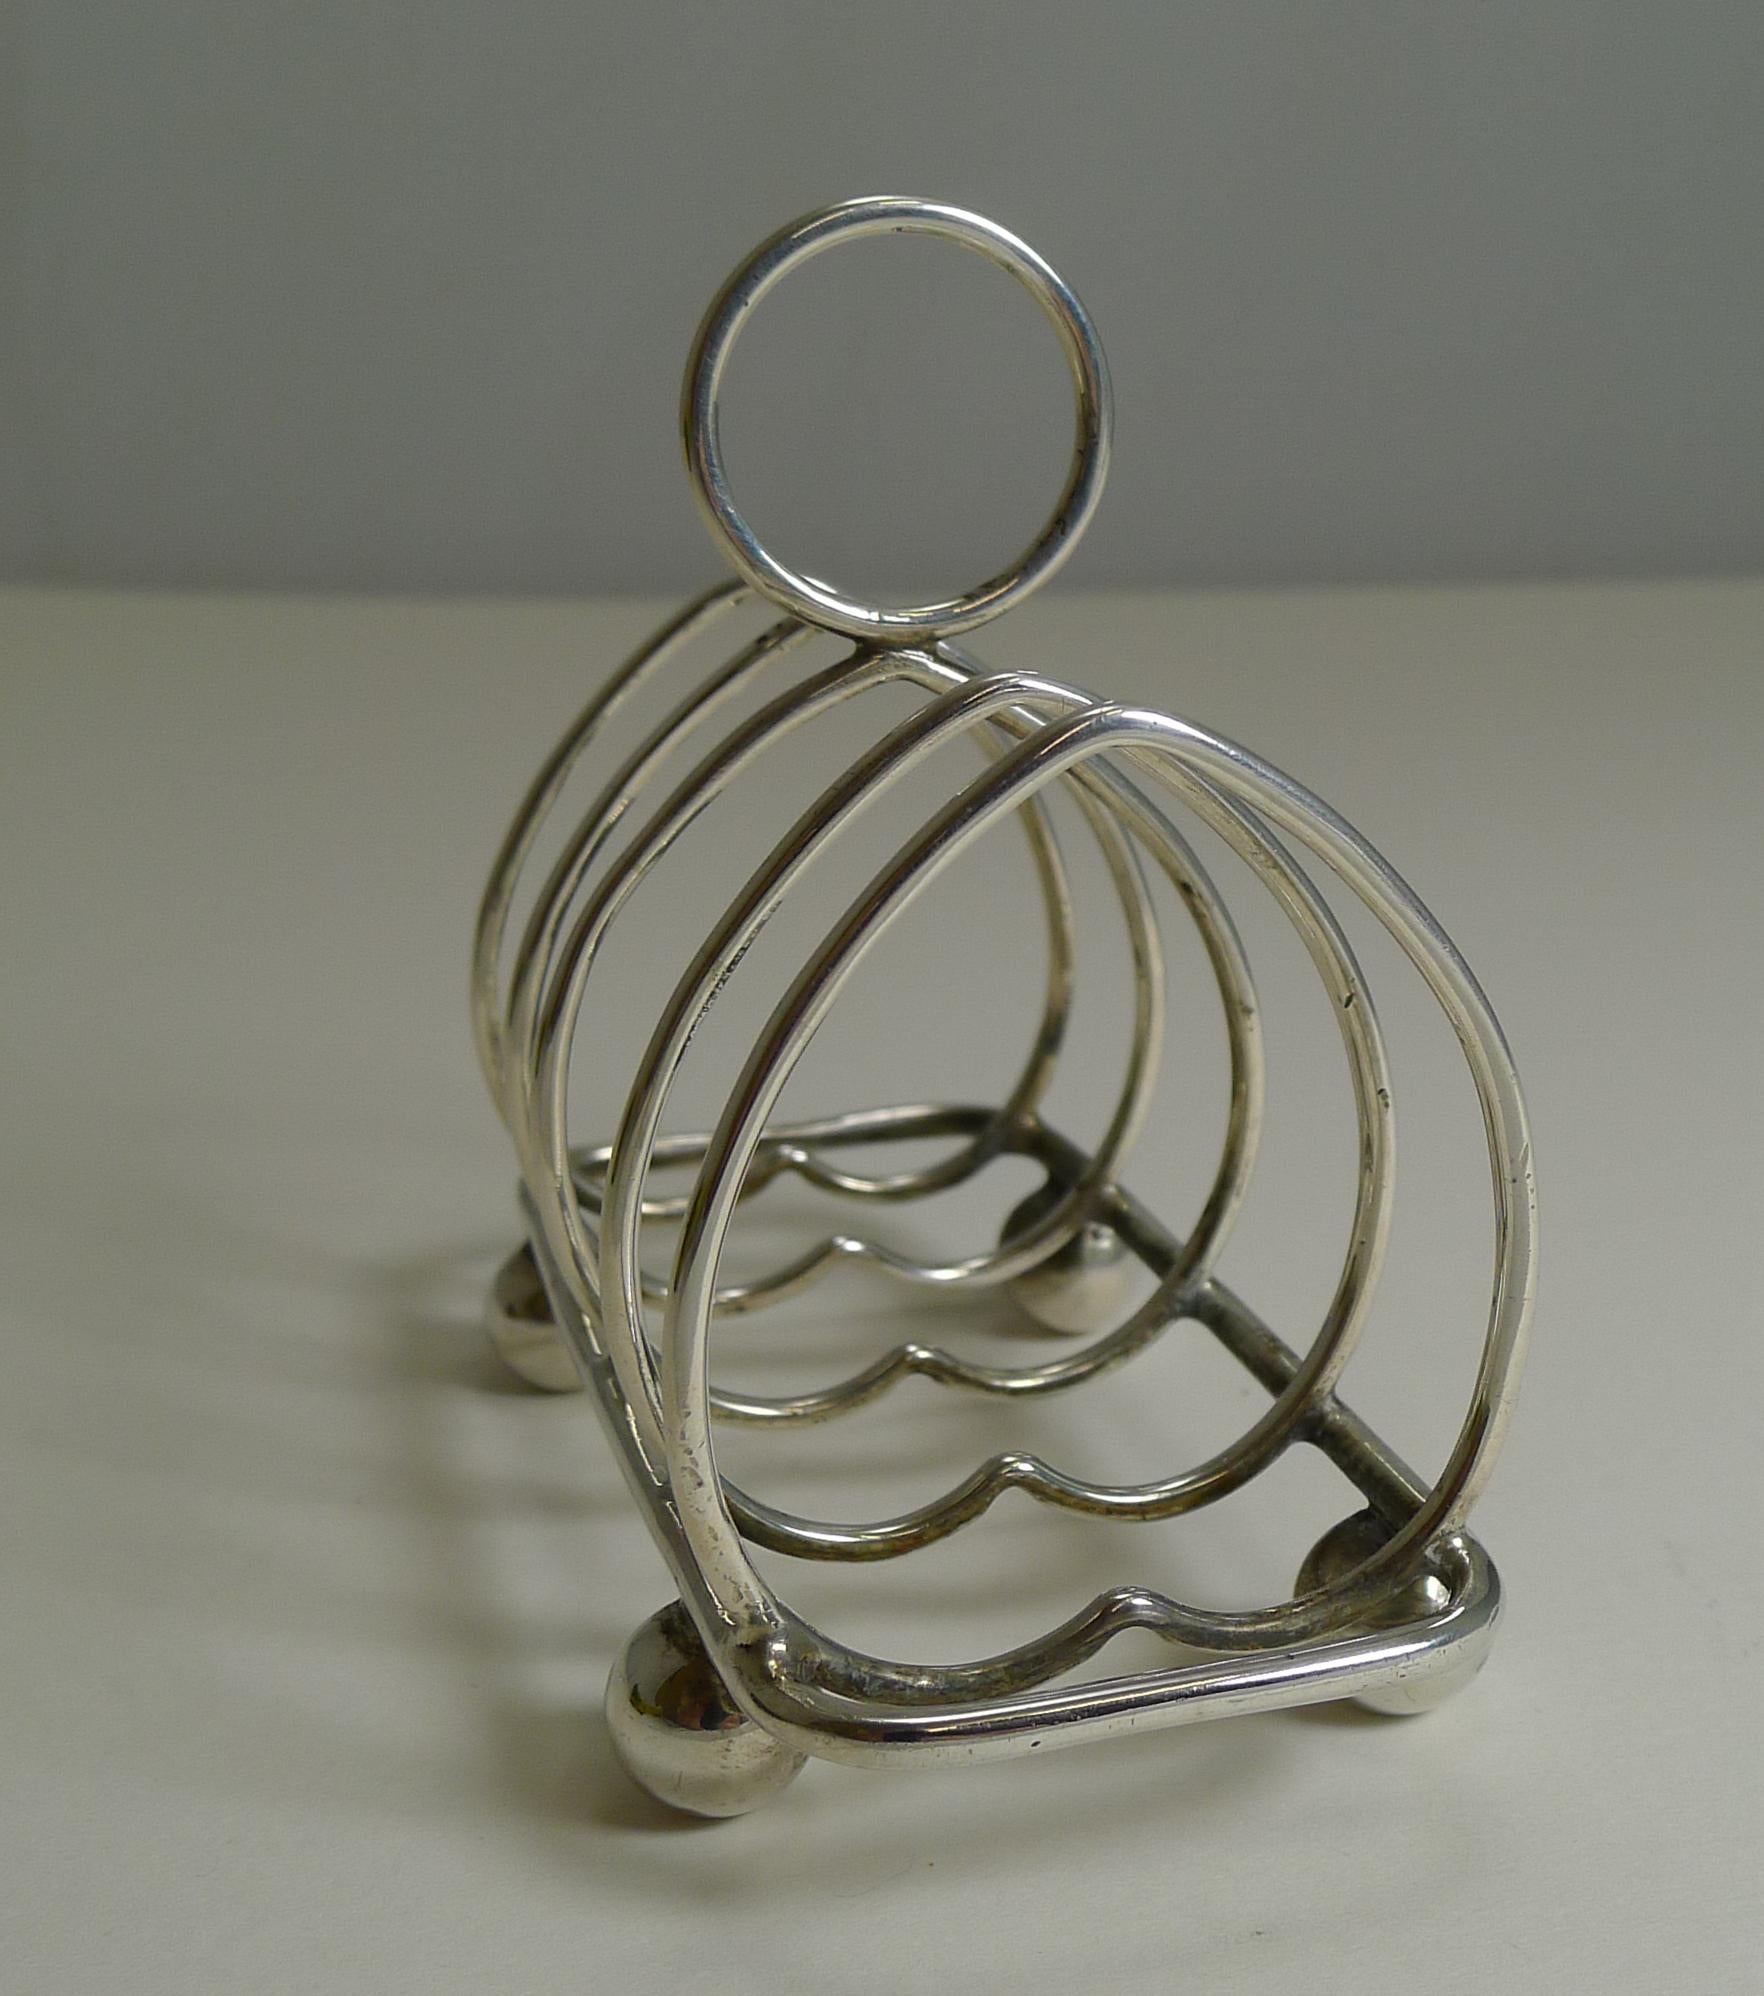 Pretty as a picture, this romantic little toast rack would look equally at place on a desk-top used for small letters or business cards.

The silver is fully hallmarked for Sheffield 1912, a true antique example over 100 years old. The makers mark